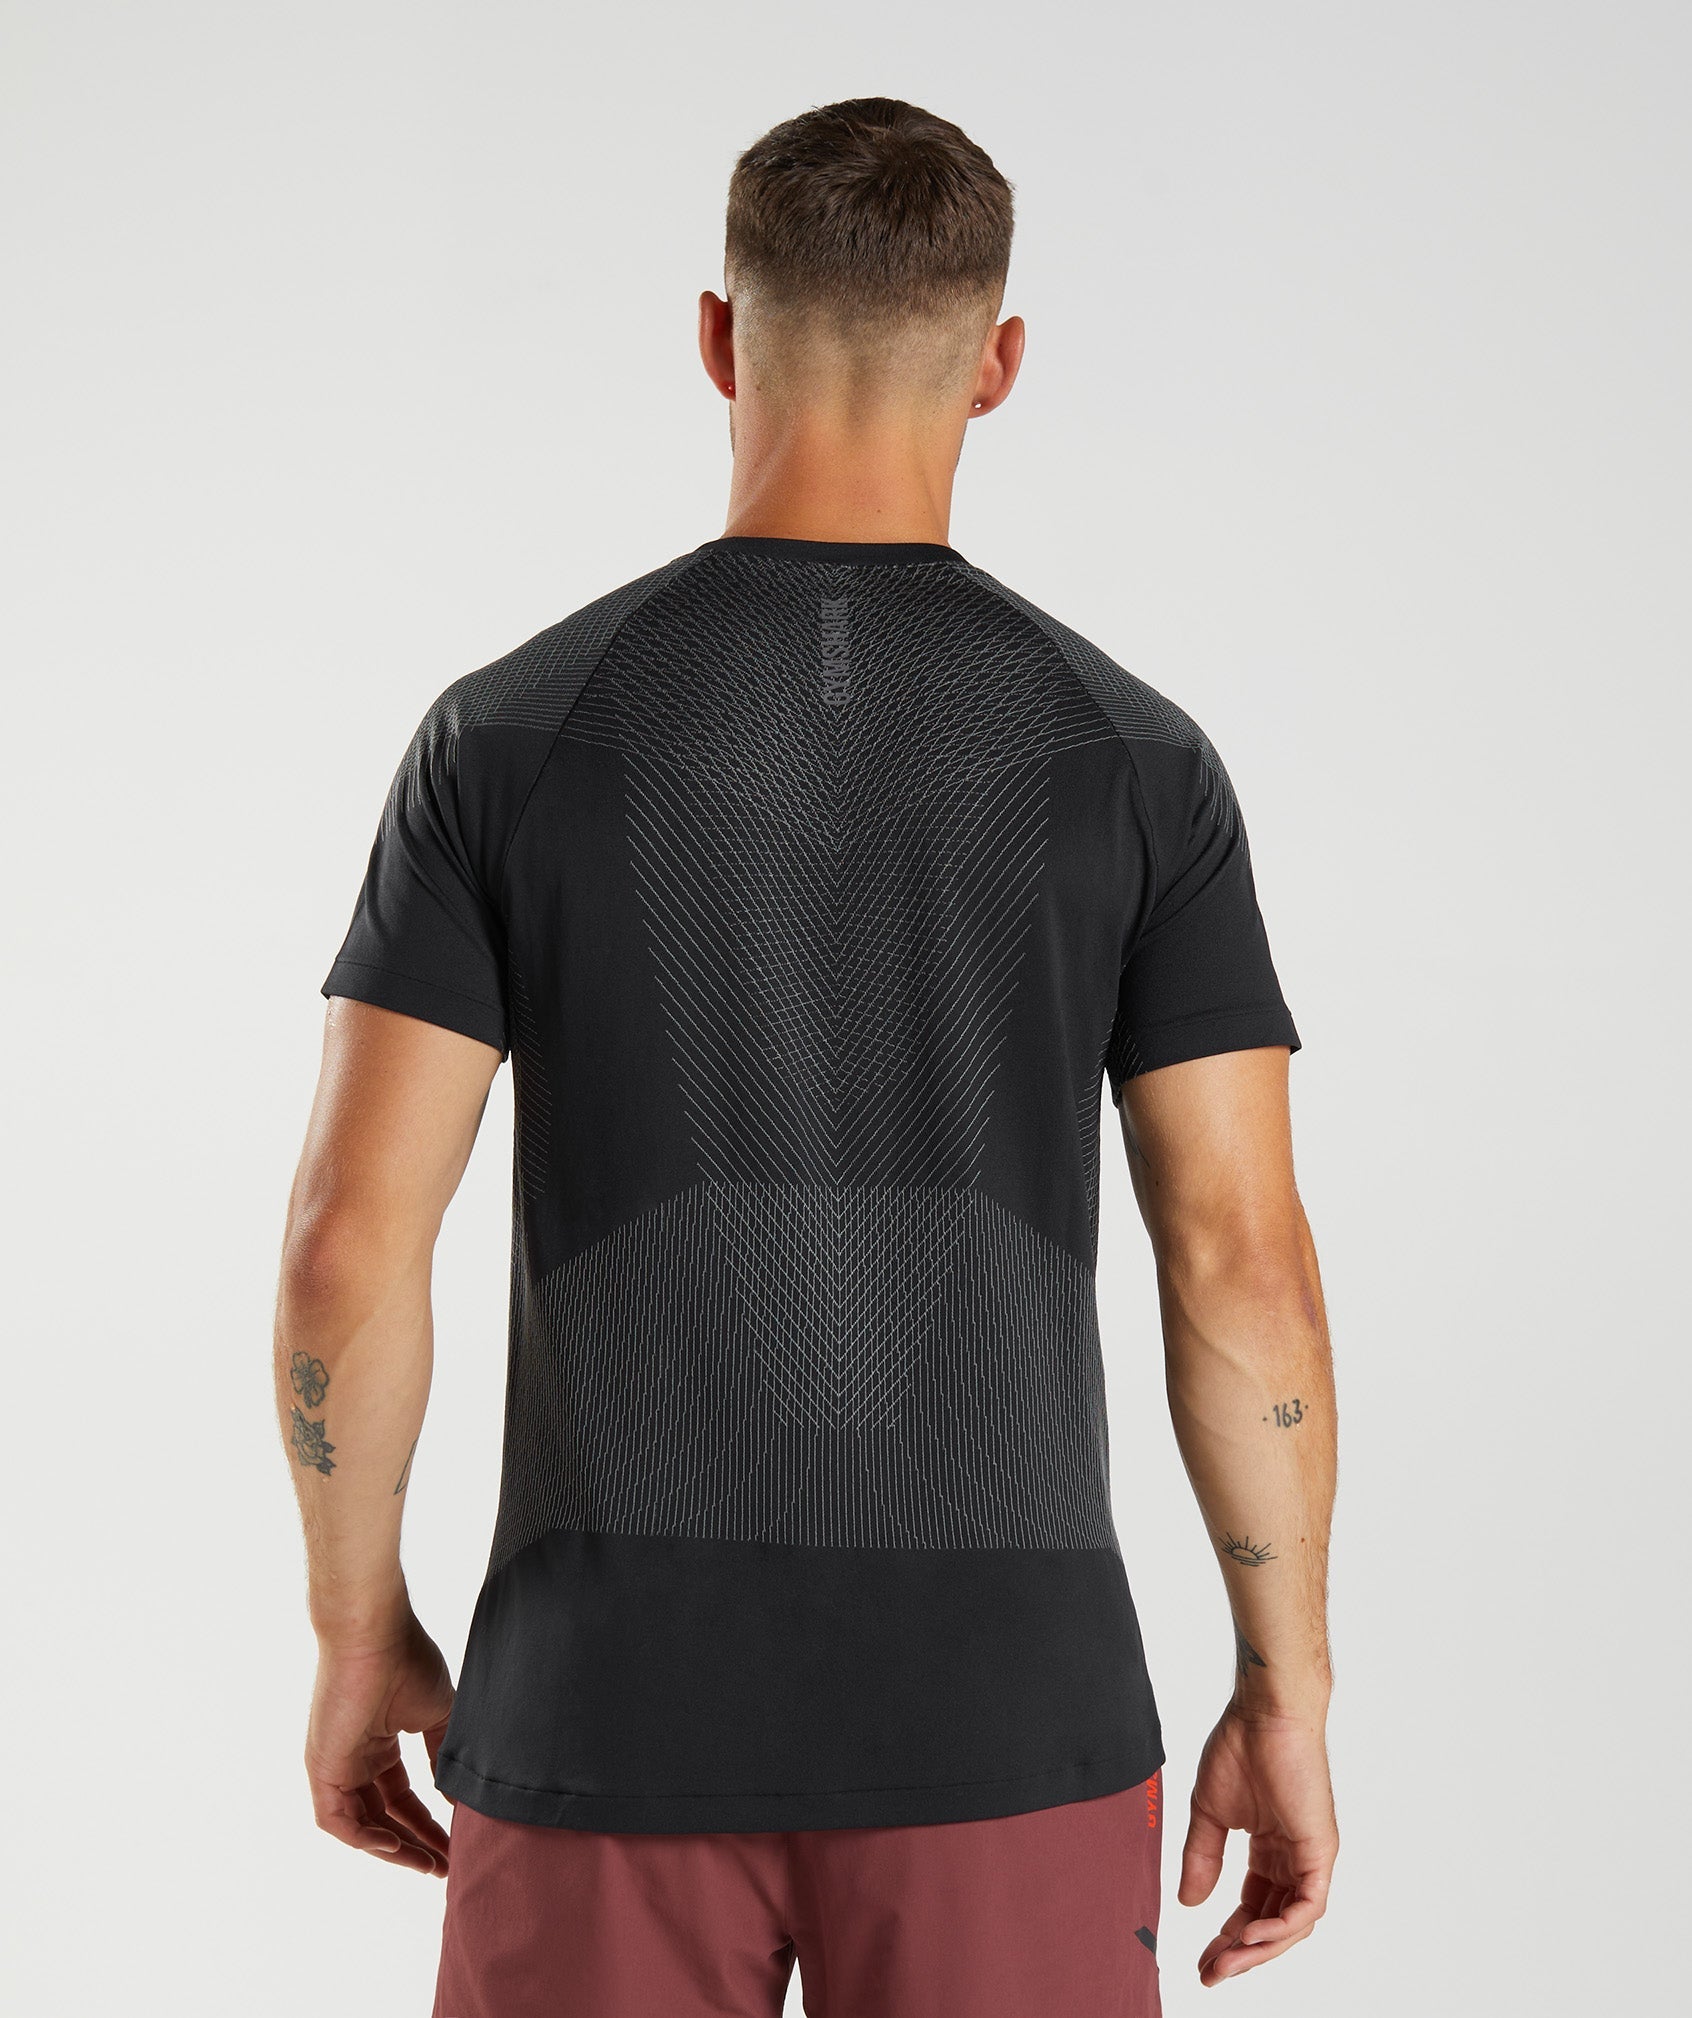 Apex Seamless T-Shirt in Black/Silhouette Grey - view 2